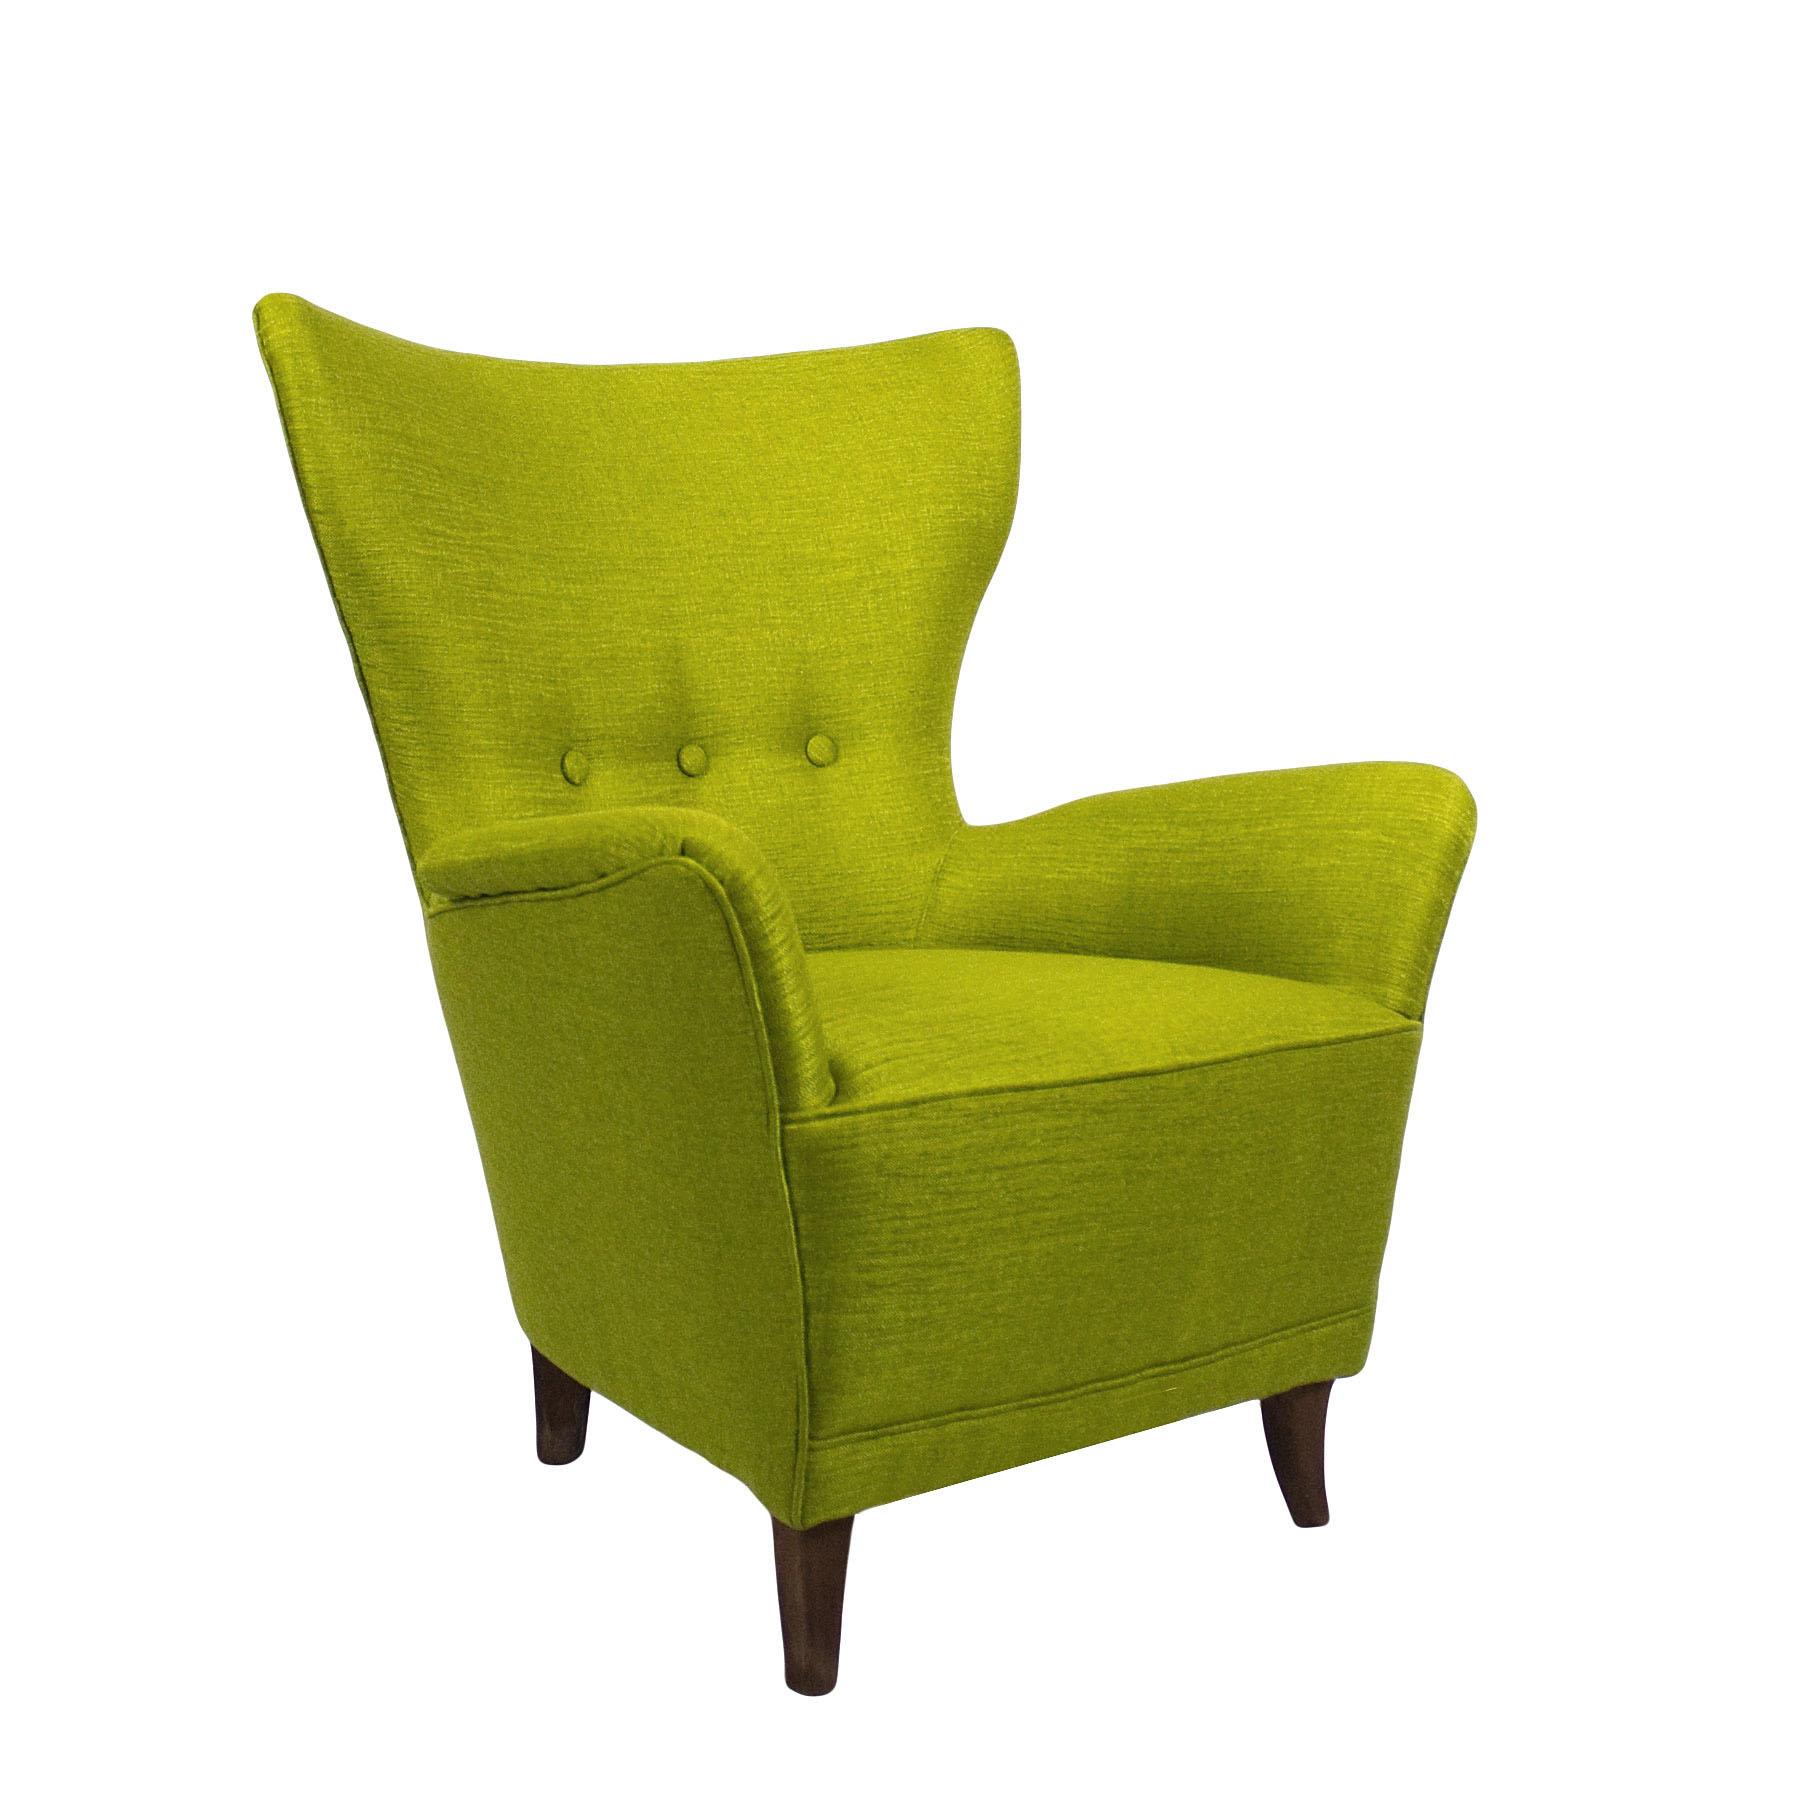 Italian Pair of Mid-Century Modern Flared Back Armchairs in Anise Green Fabric - Italy